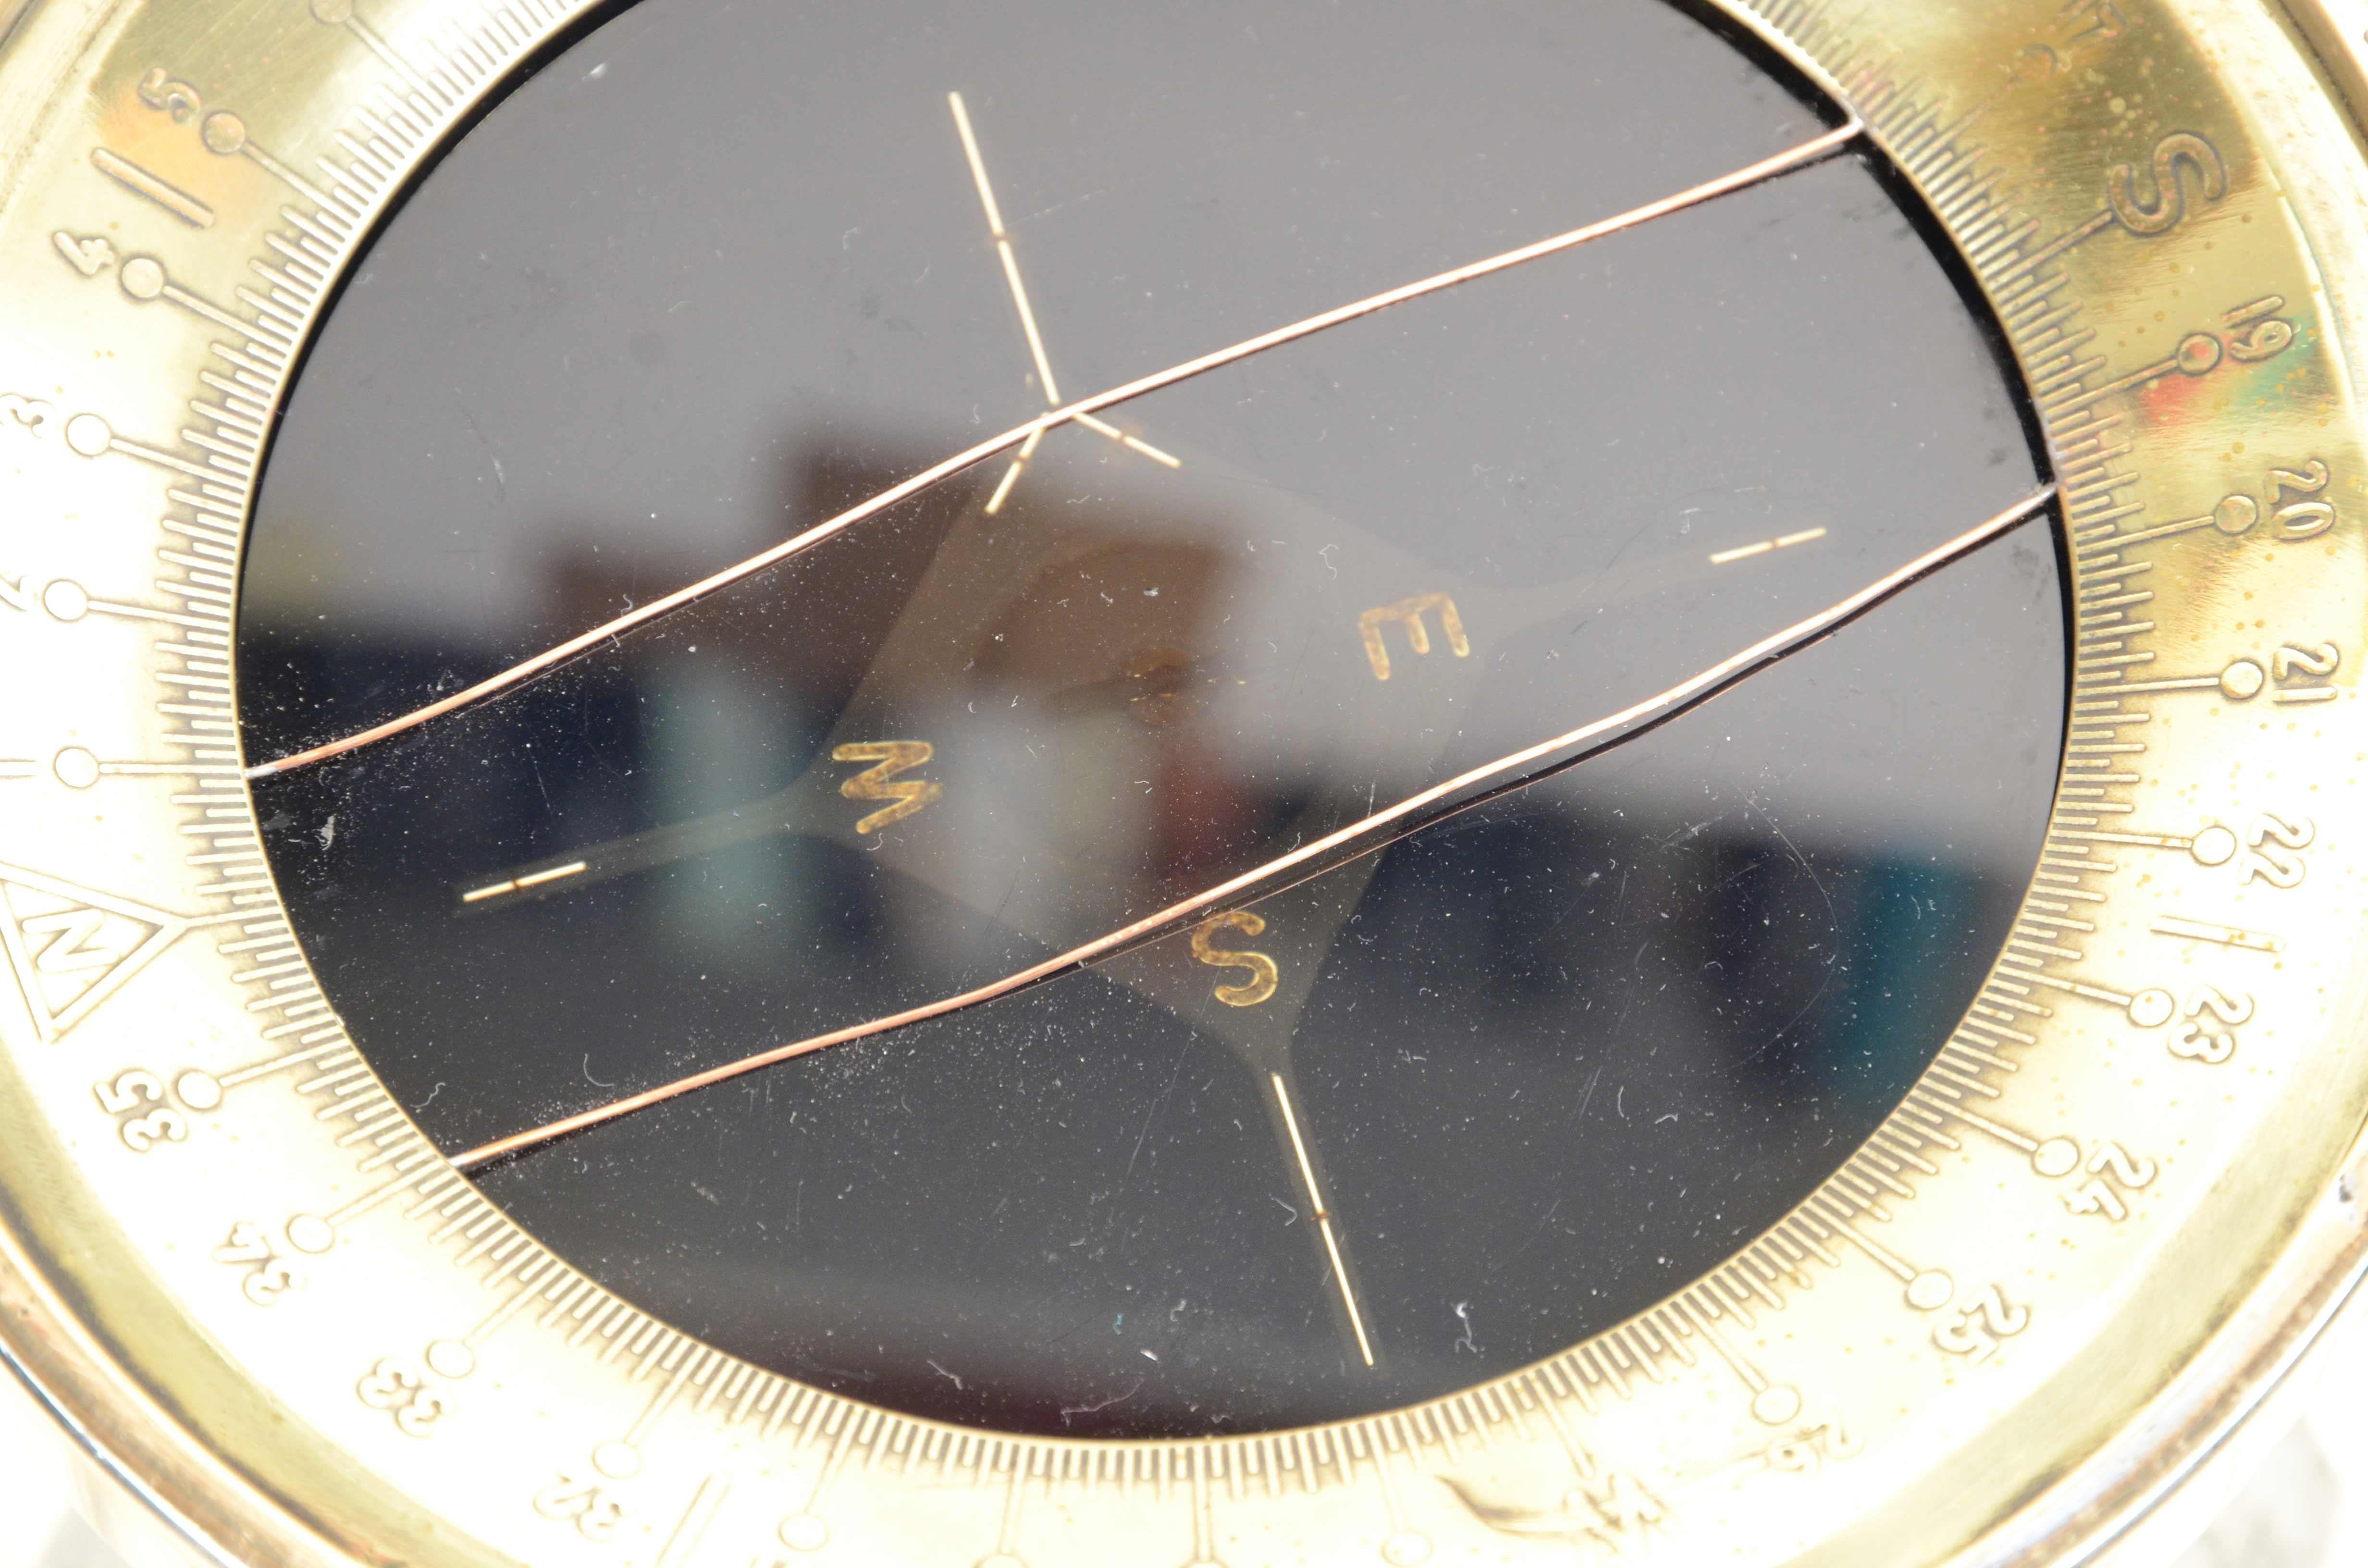 azimuth ring compass